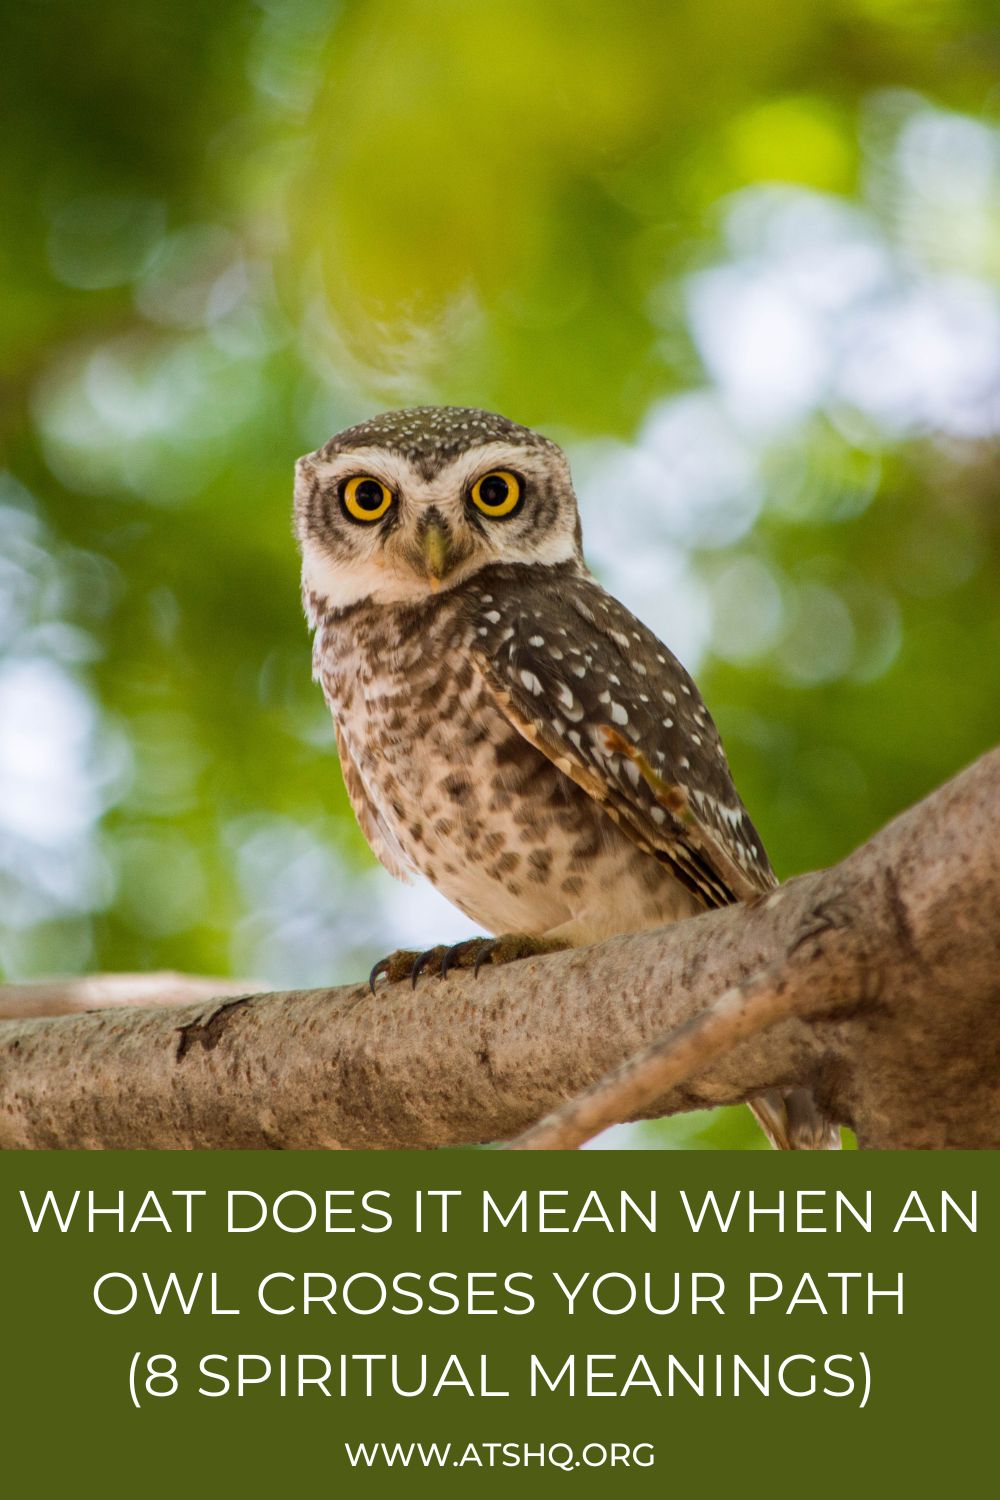 What Does It Mean When An Owl Crosses Your Path? (8 Spiritual Meanings)